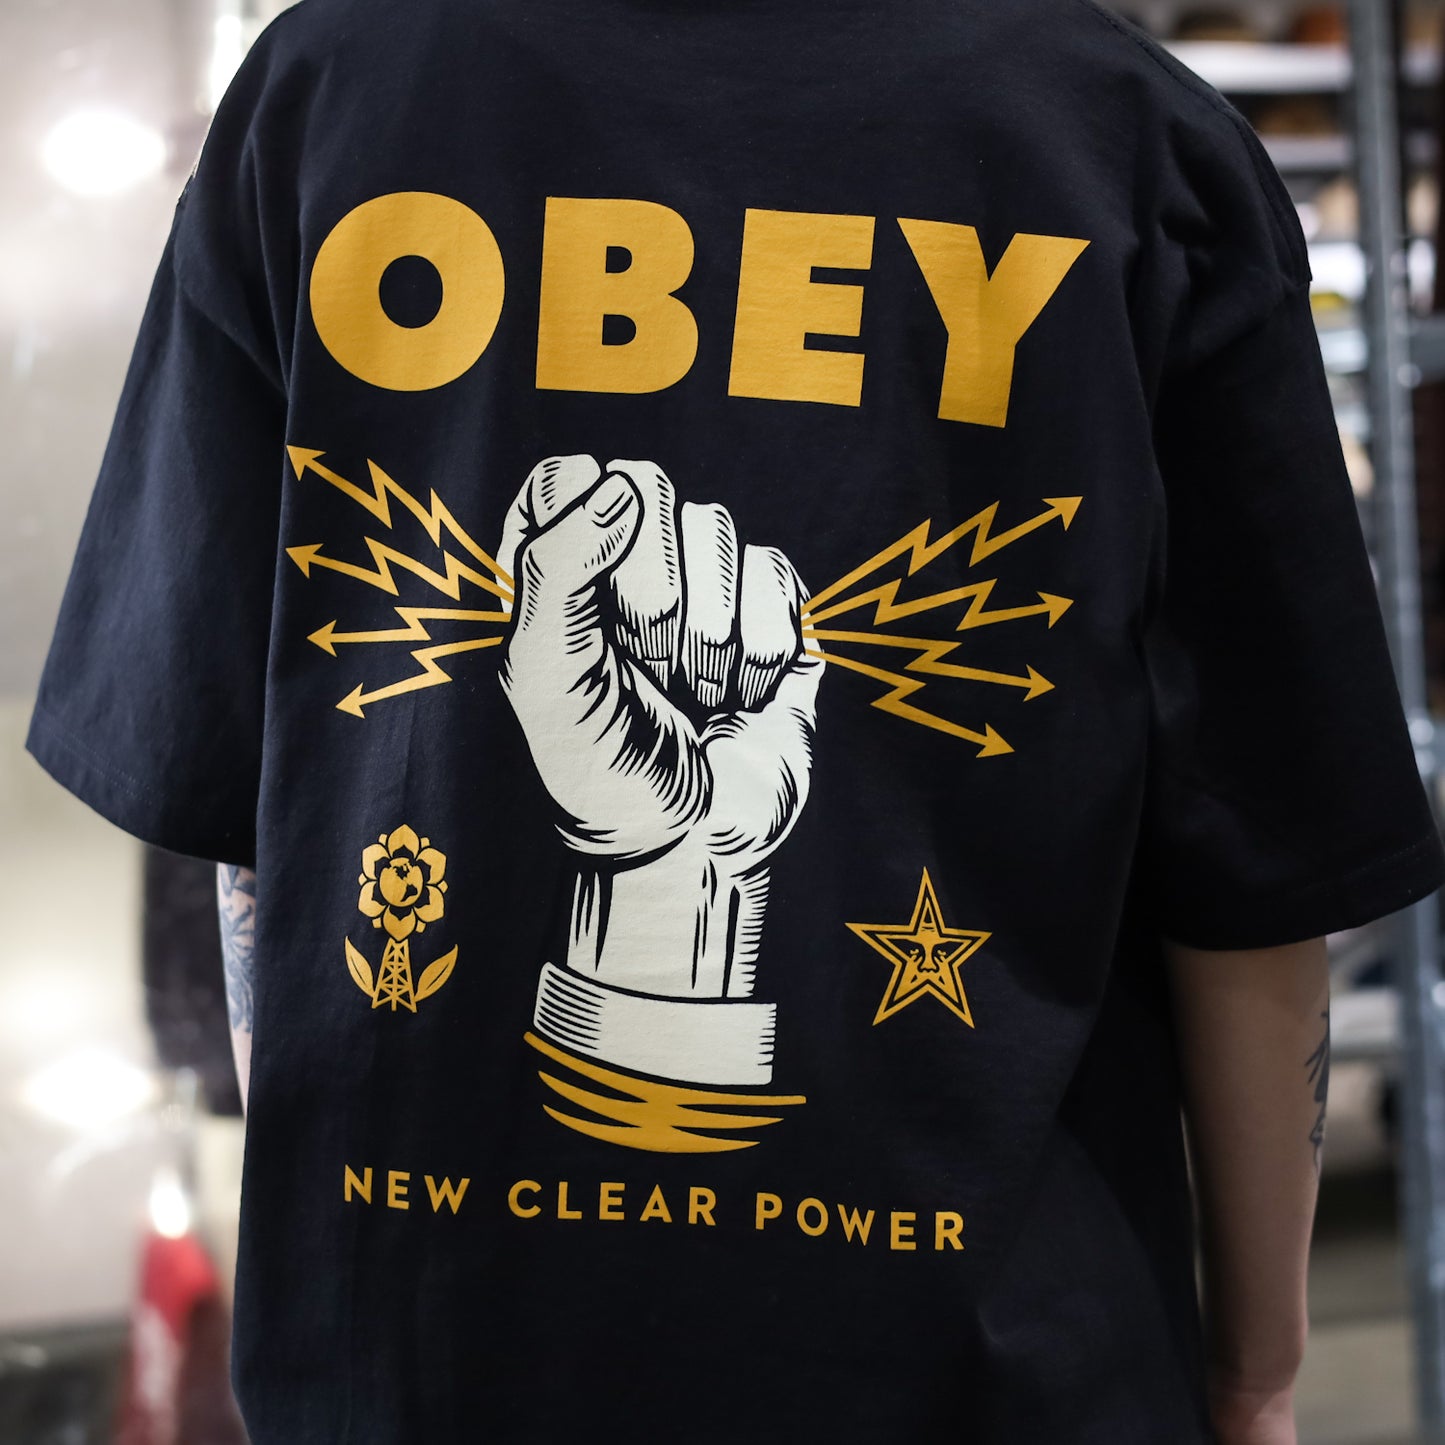 OBEY / NEW CLEAR POWER CLASSIC TEE (BLACK)